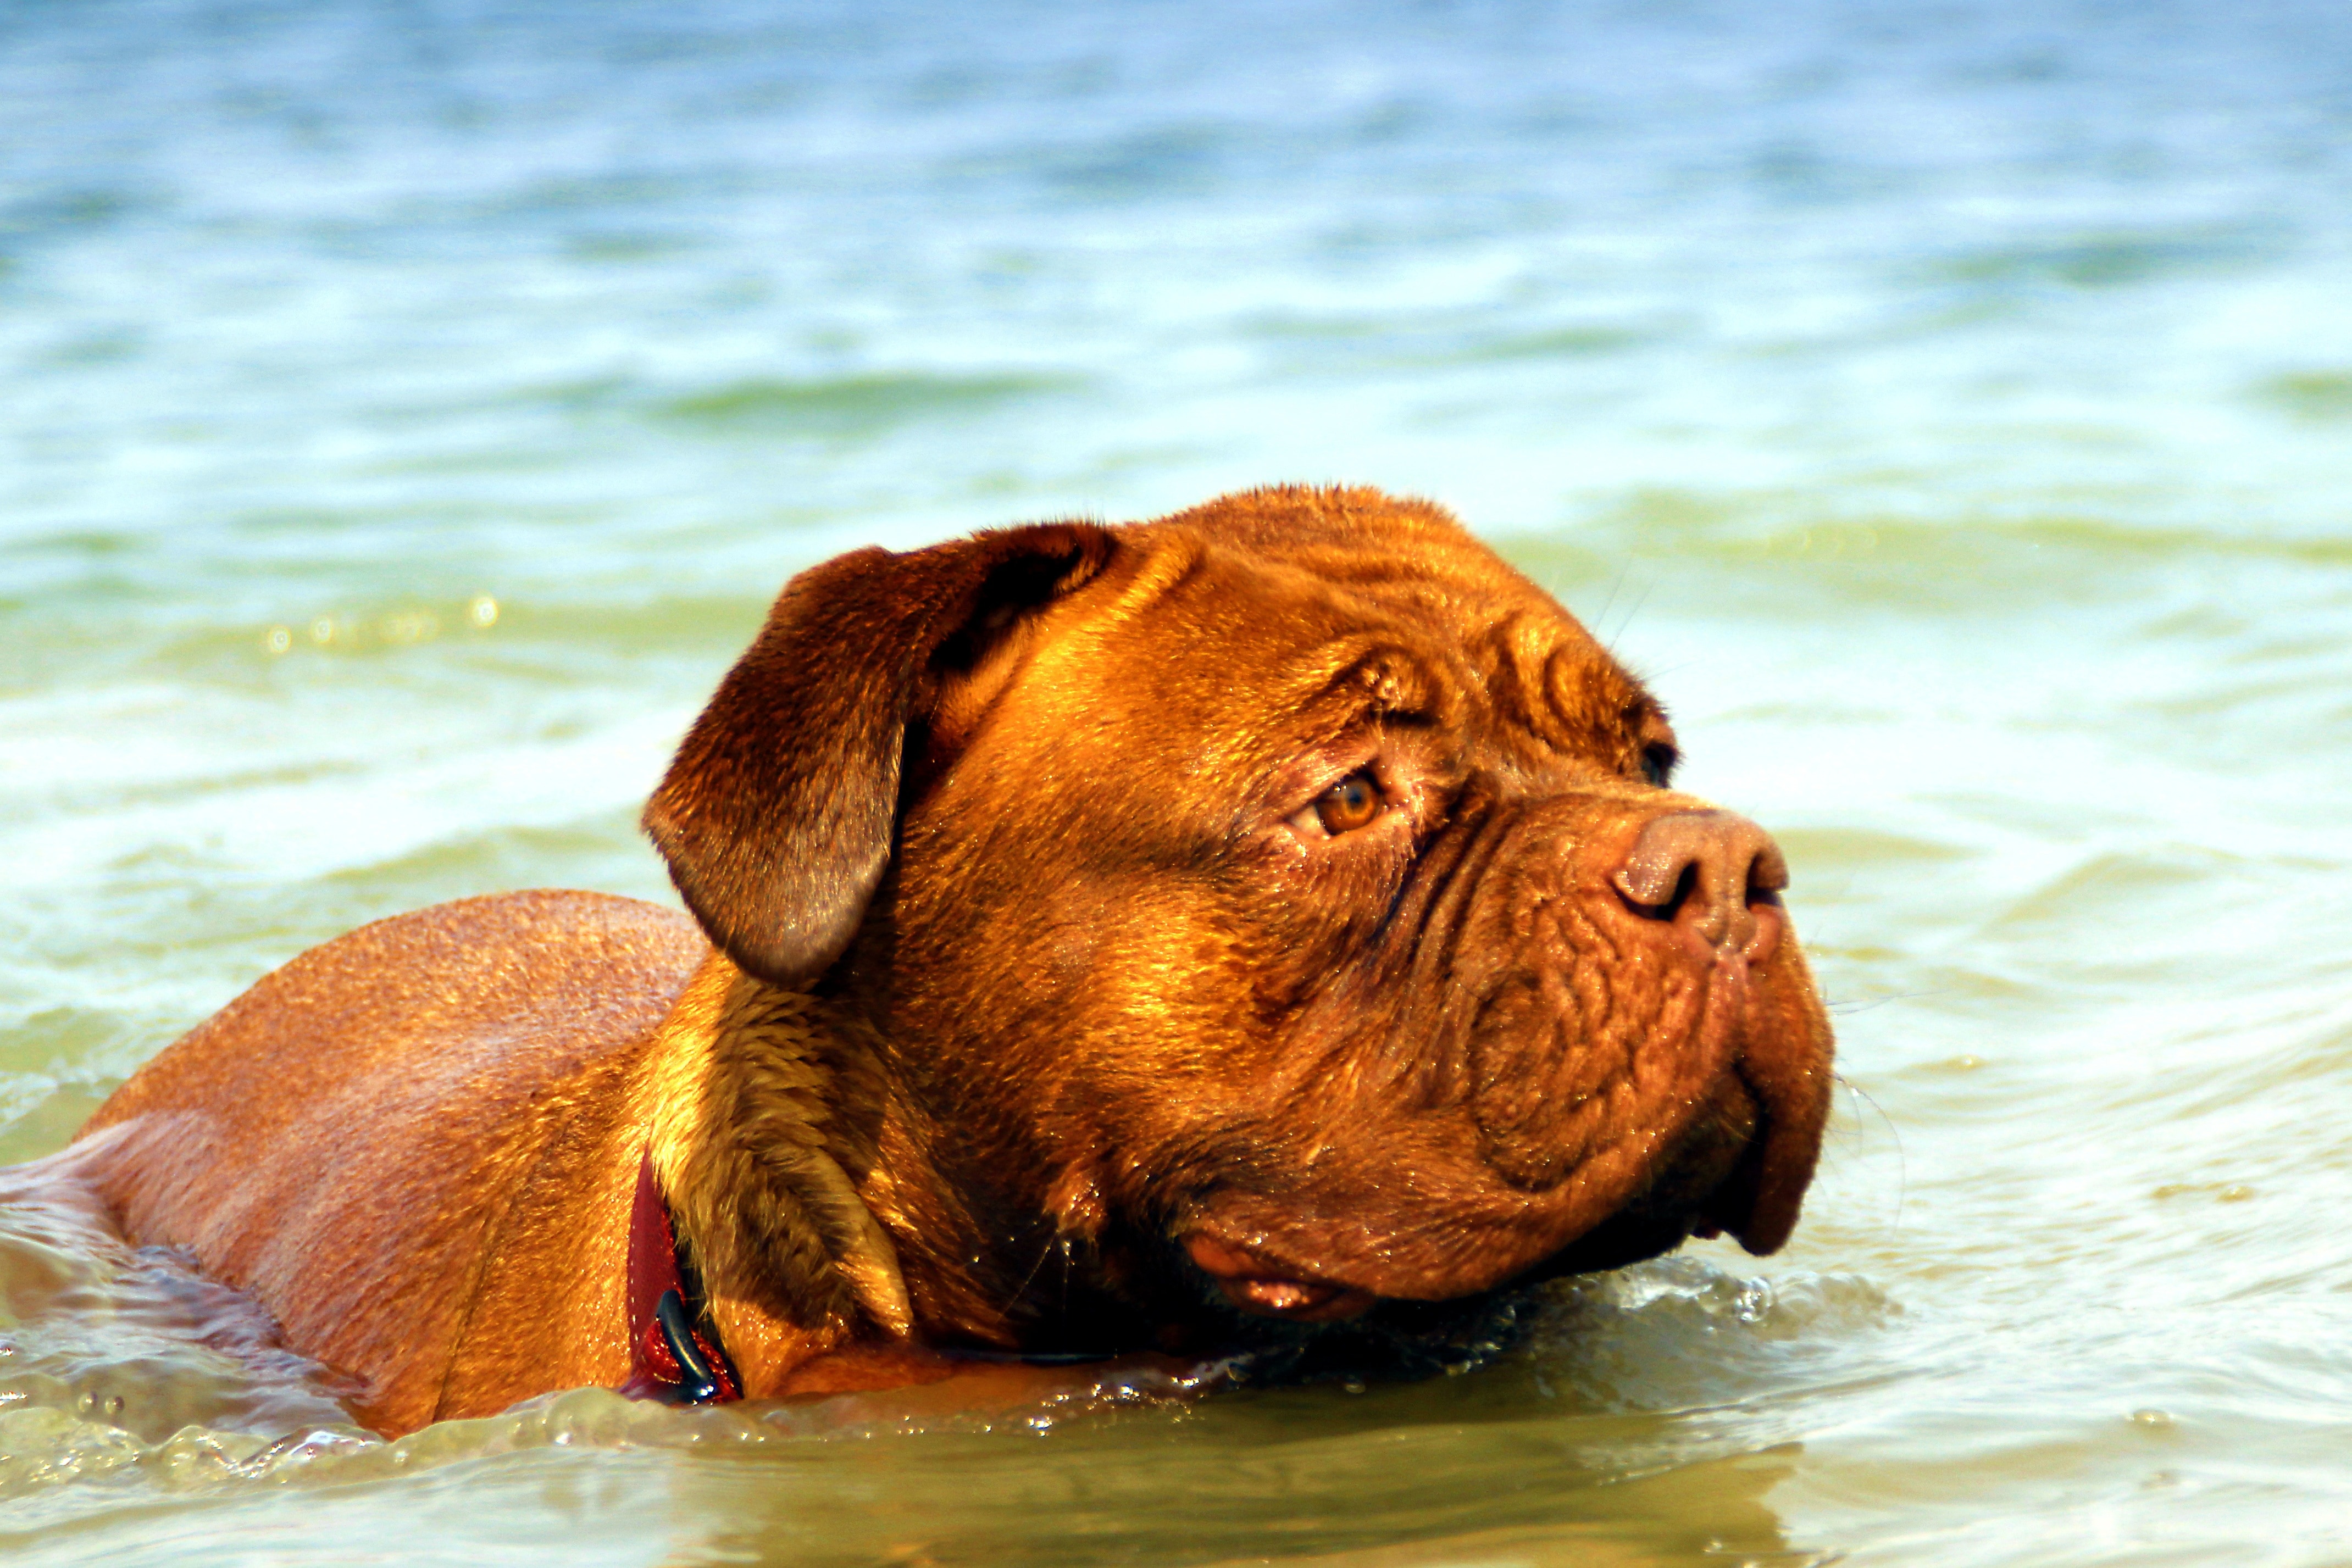 Bordeaux, De, Dogue, Water, Muddy, Dog, one animal, pets